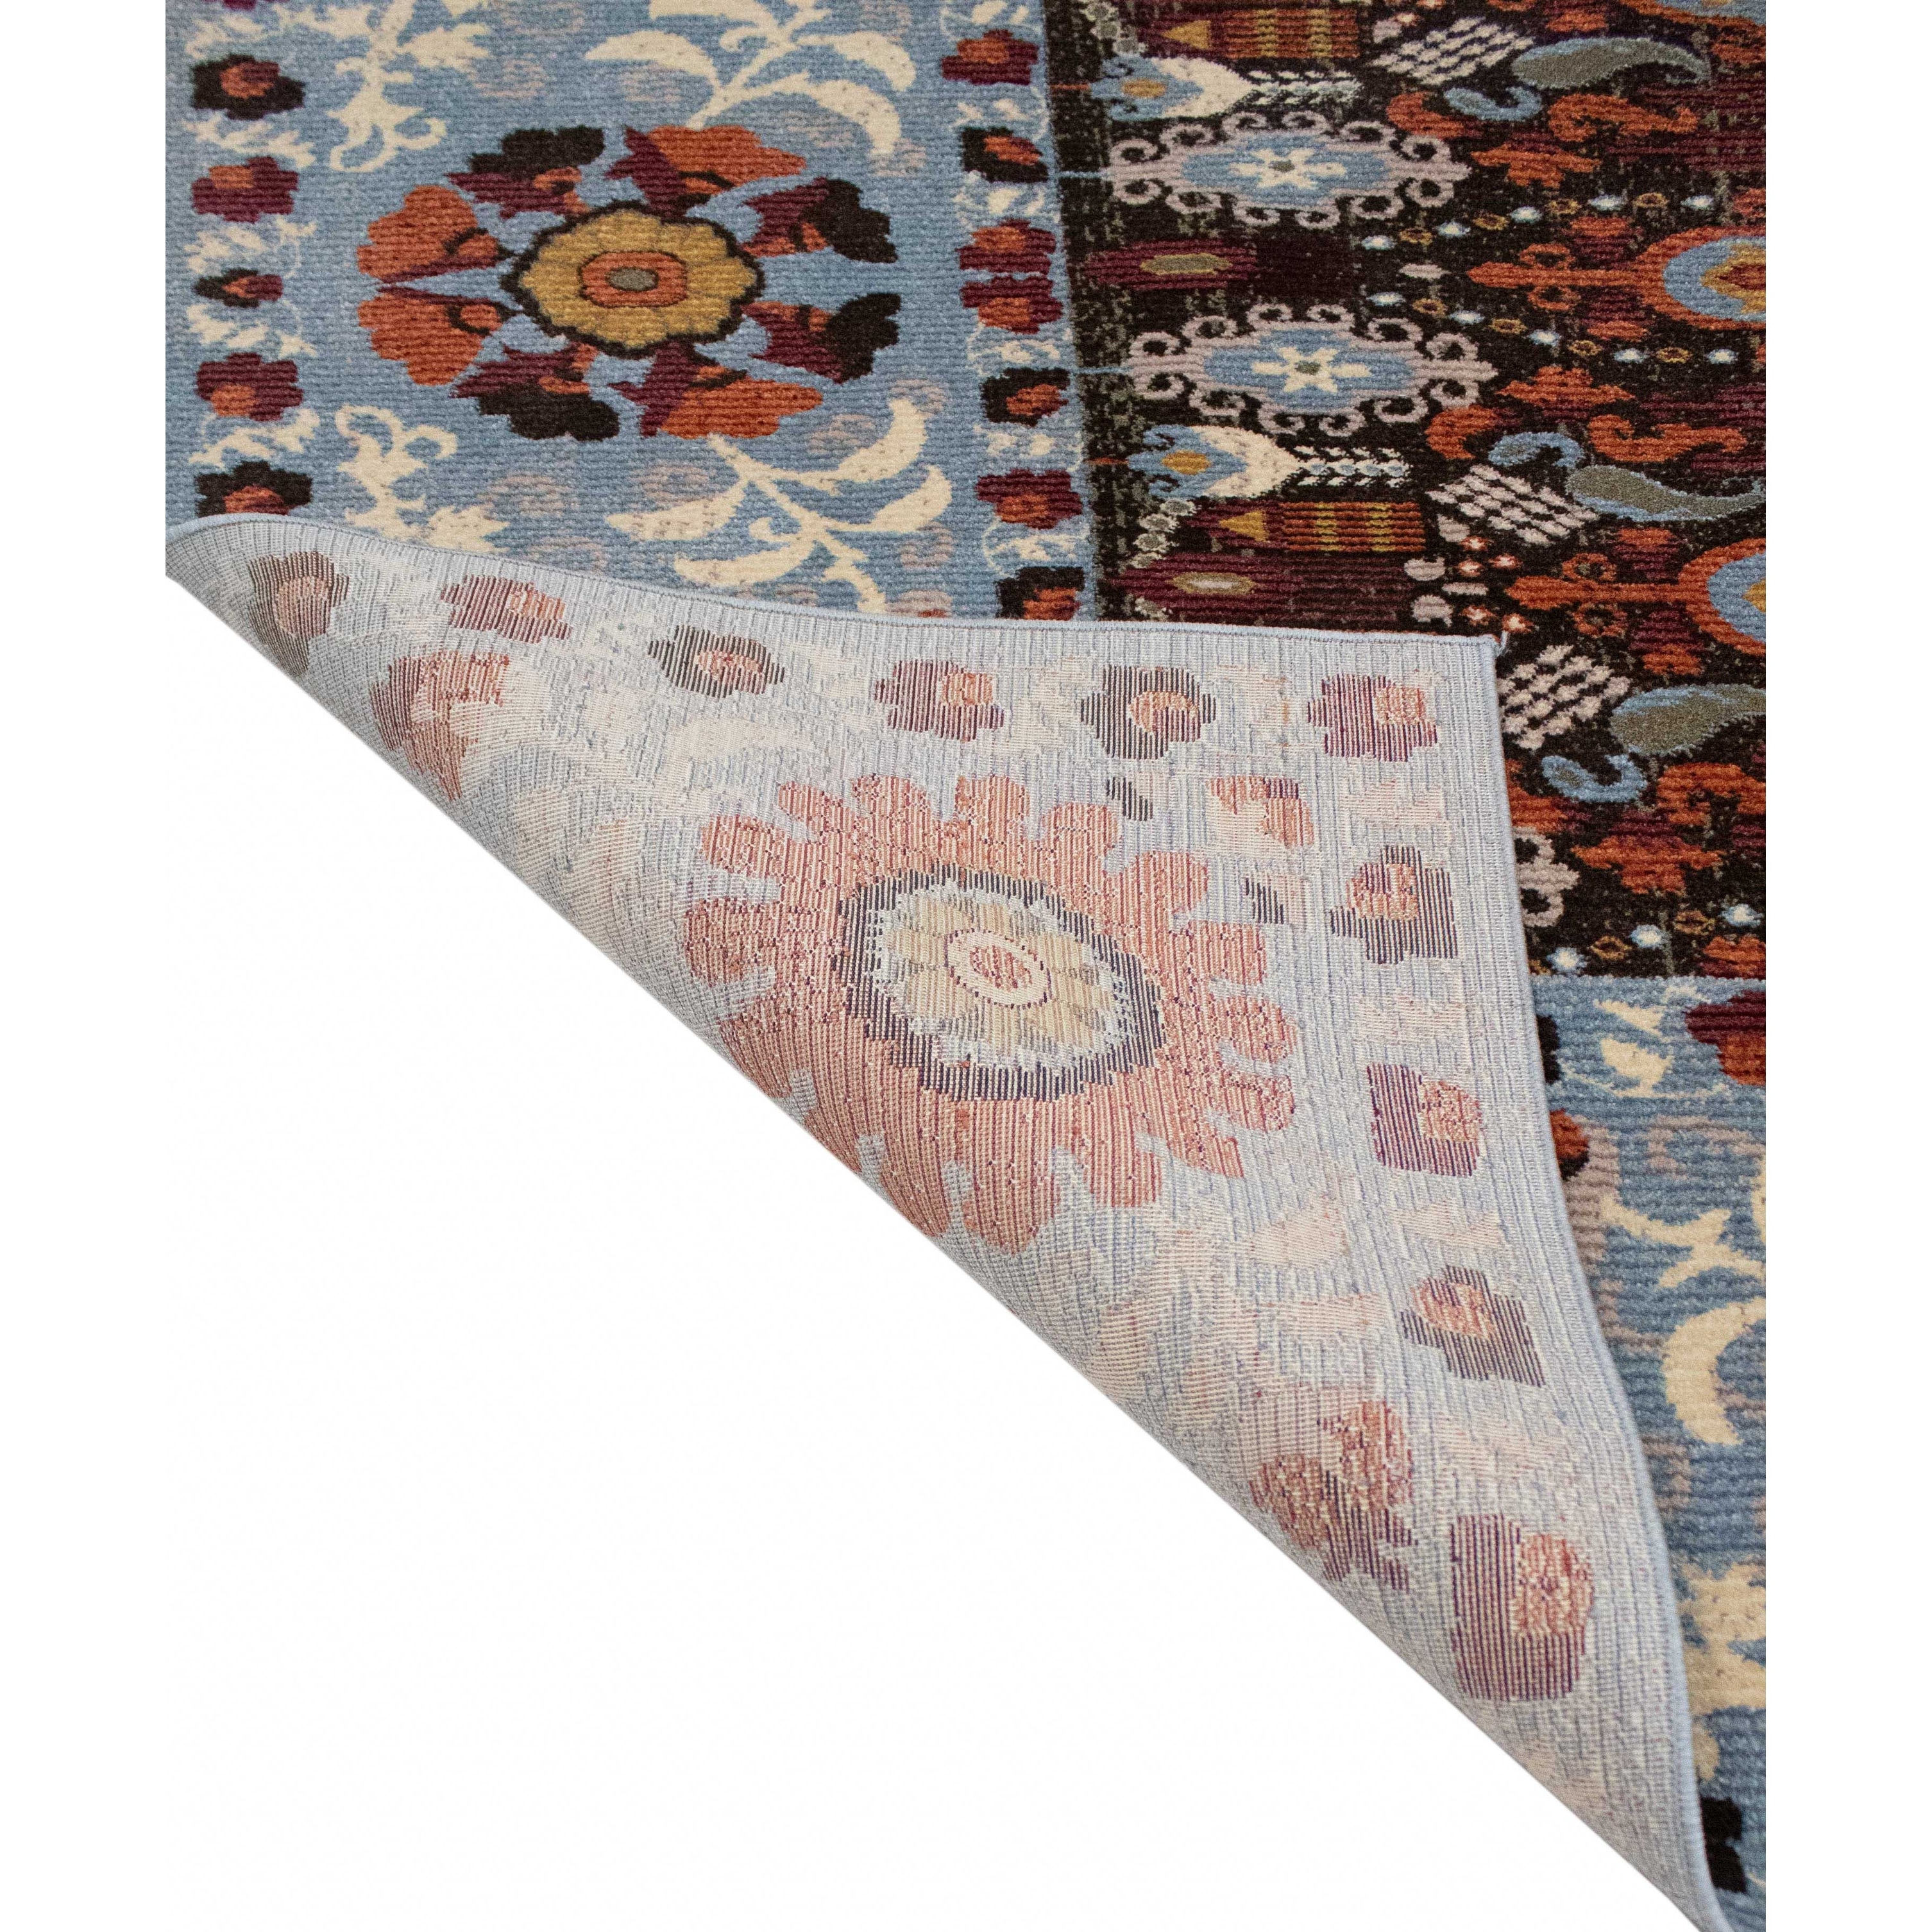 https://ak1.ostkcdn.com/images/products/is/images/direct/a59596d0f9902d4ae5b957917d1aba3b053a1b35/Noori-Rug-Karabag-Socorro-Rug.jpg